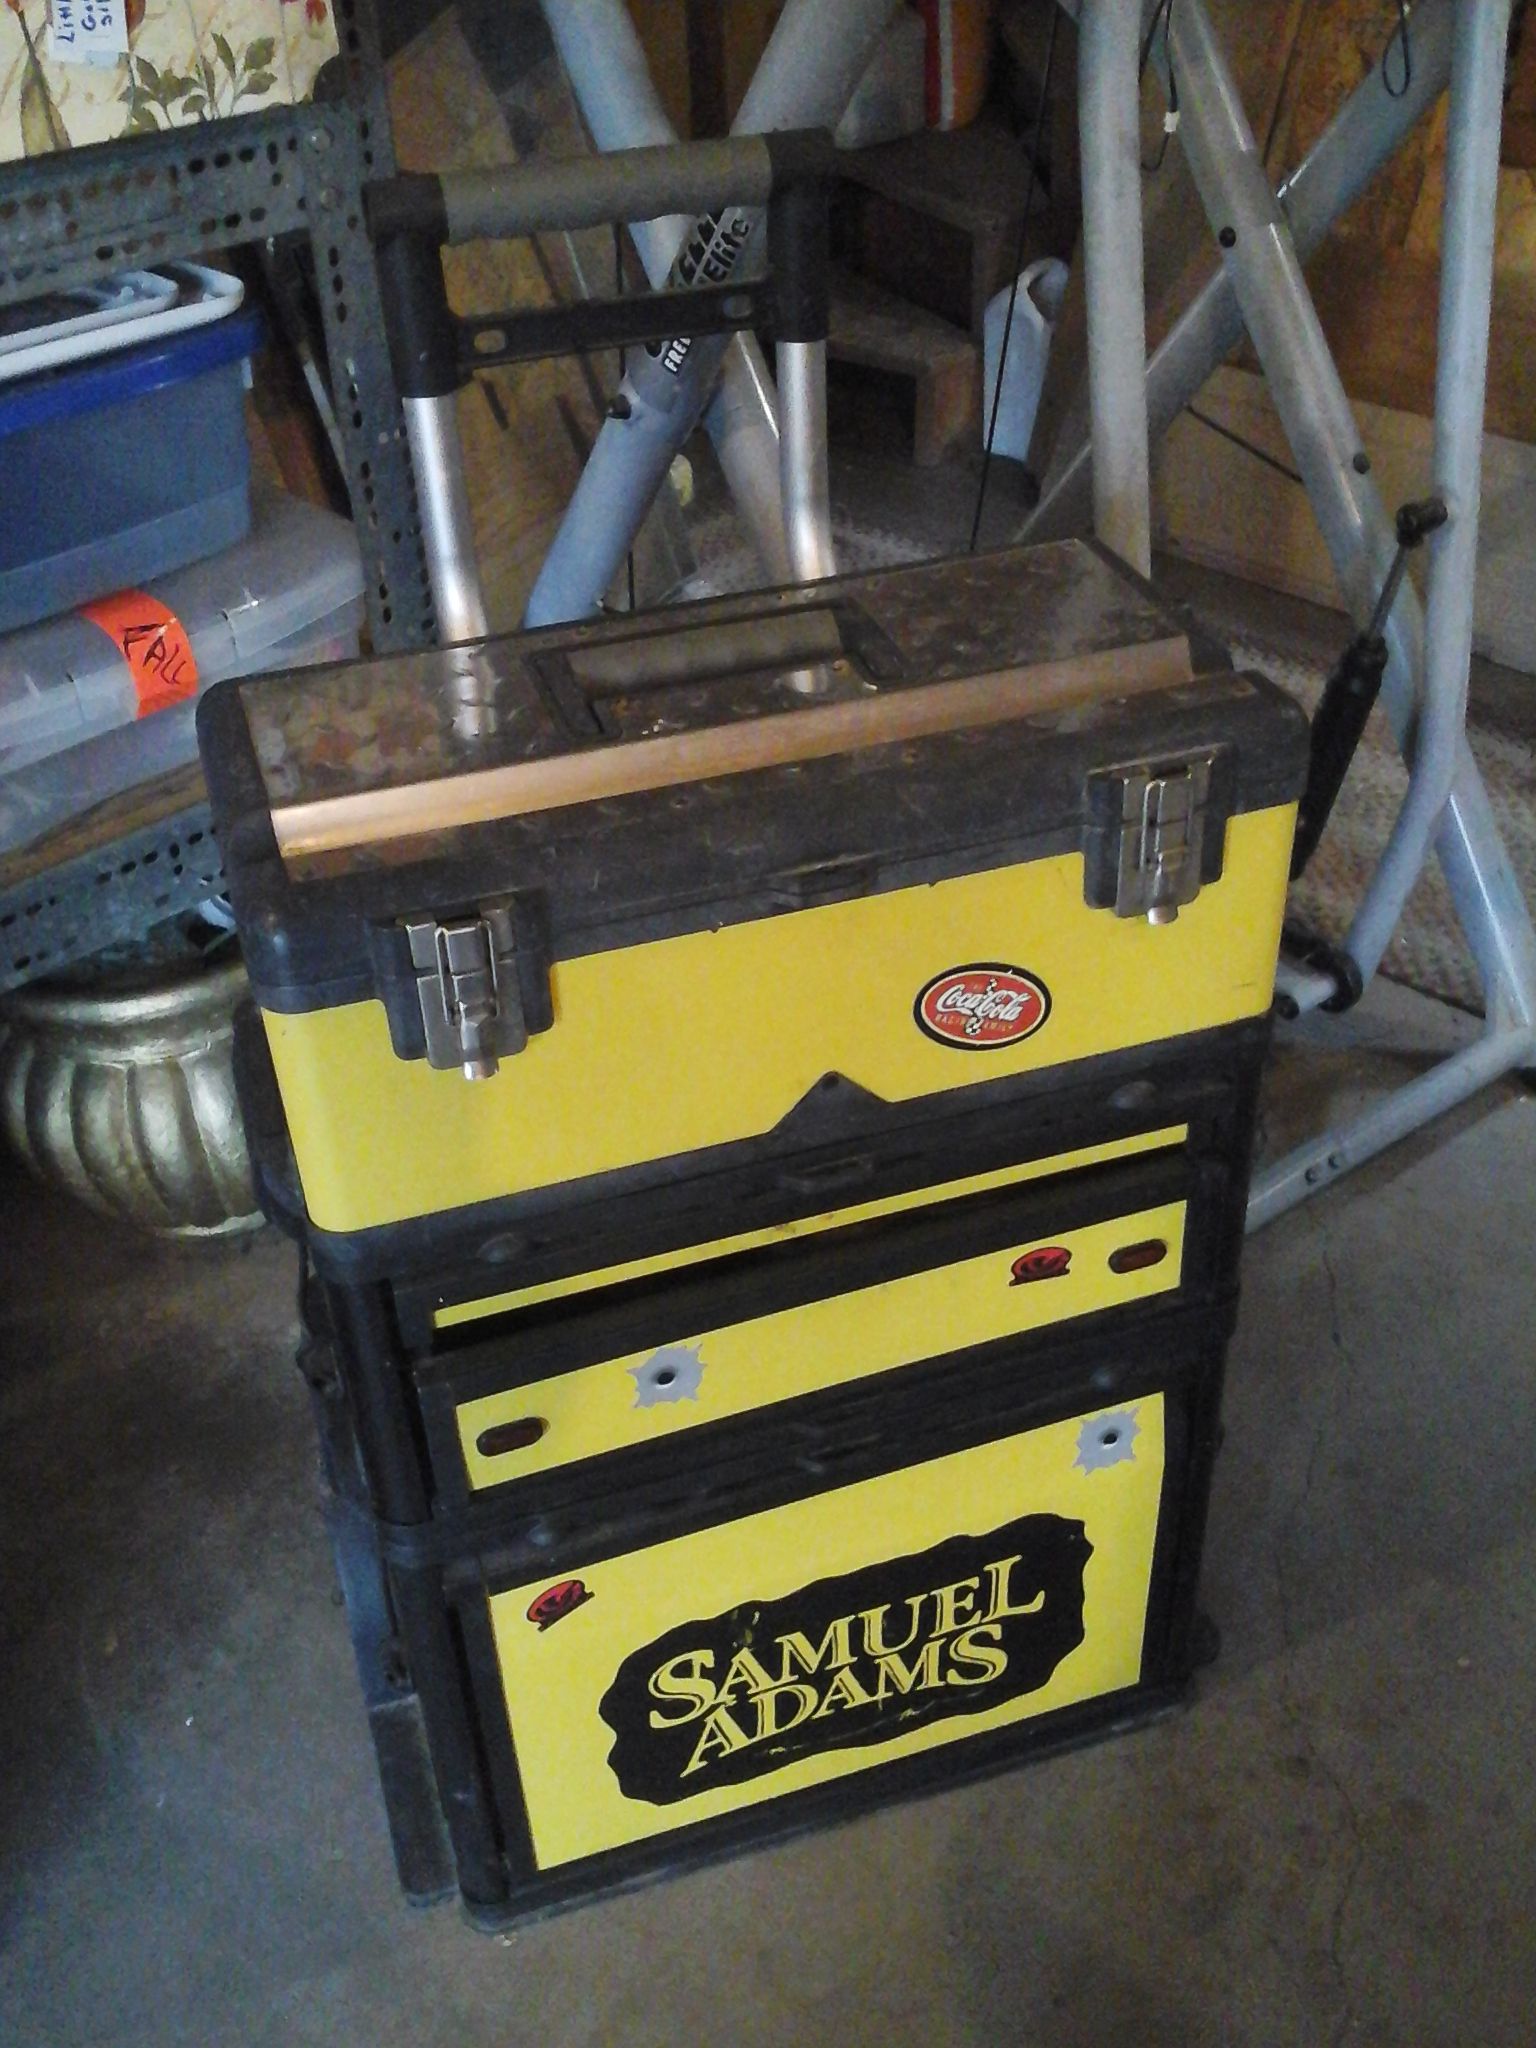 Stanley tool chest on wheels. Compartments have items in them